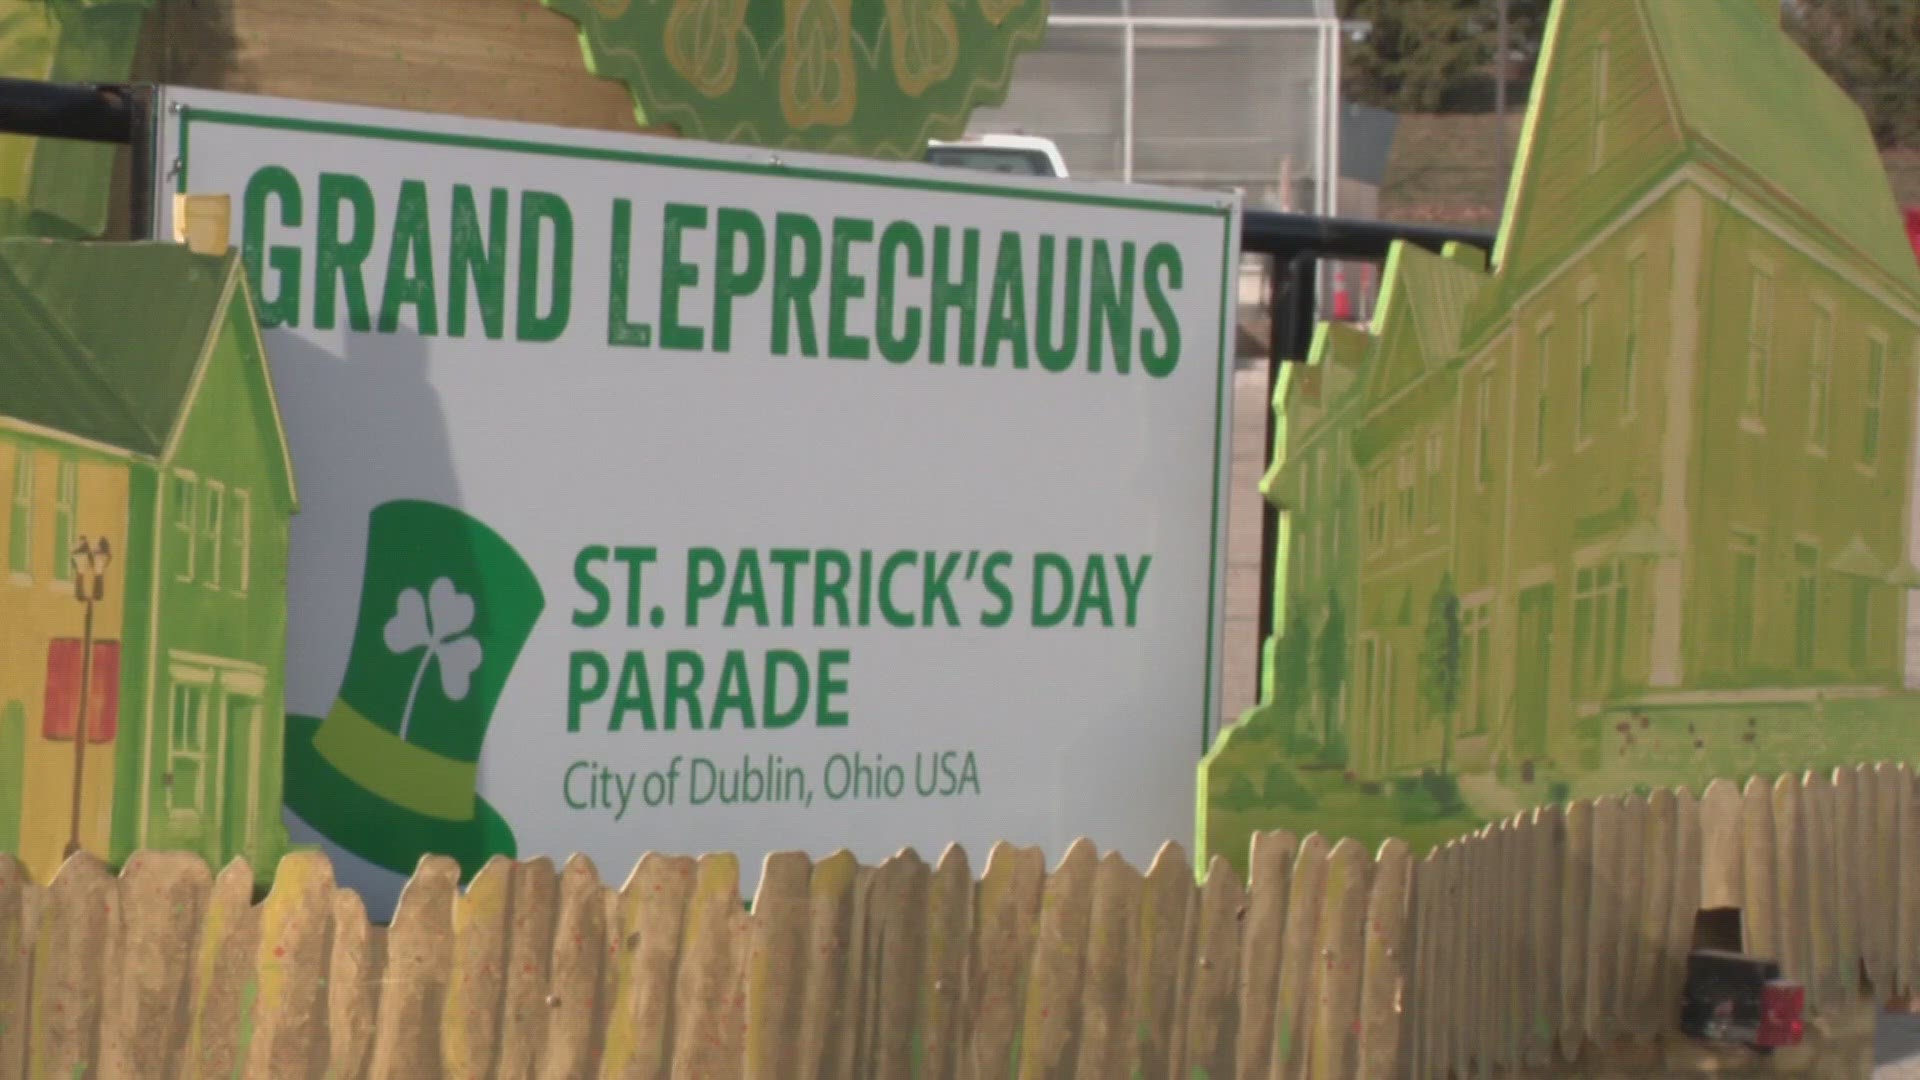 The regional parade at 11 a.m. will be led by the grand leprechaun. The route will begin at Metro Center and continue on through Historic Dublin.